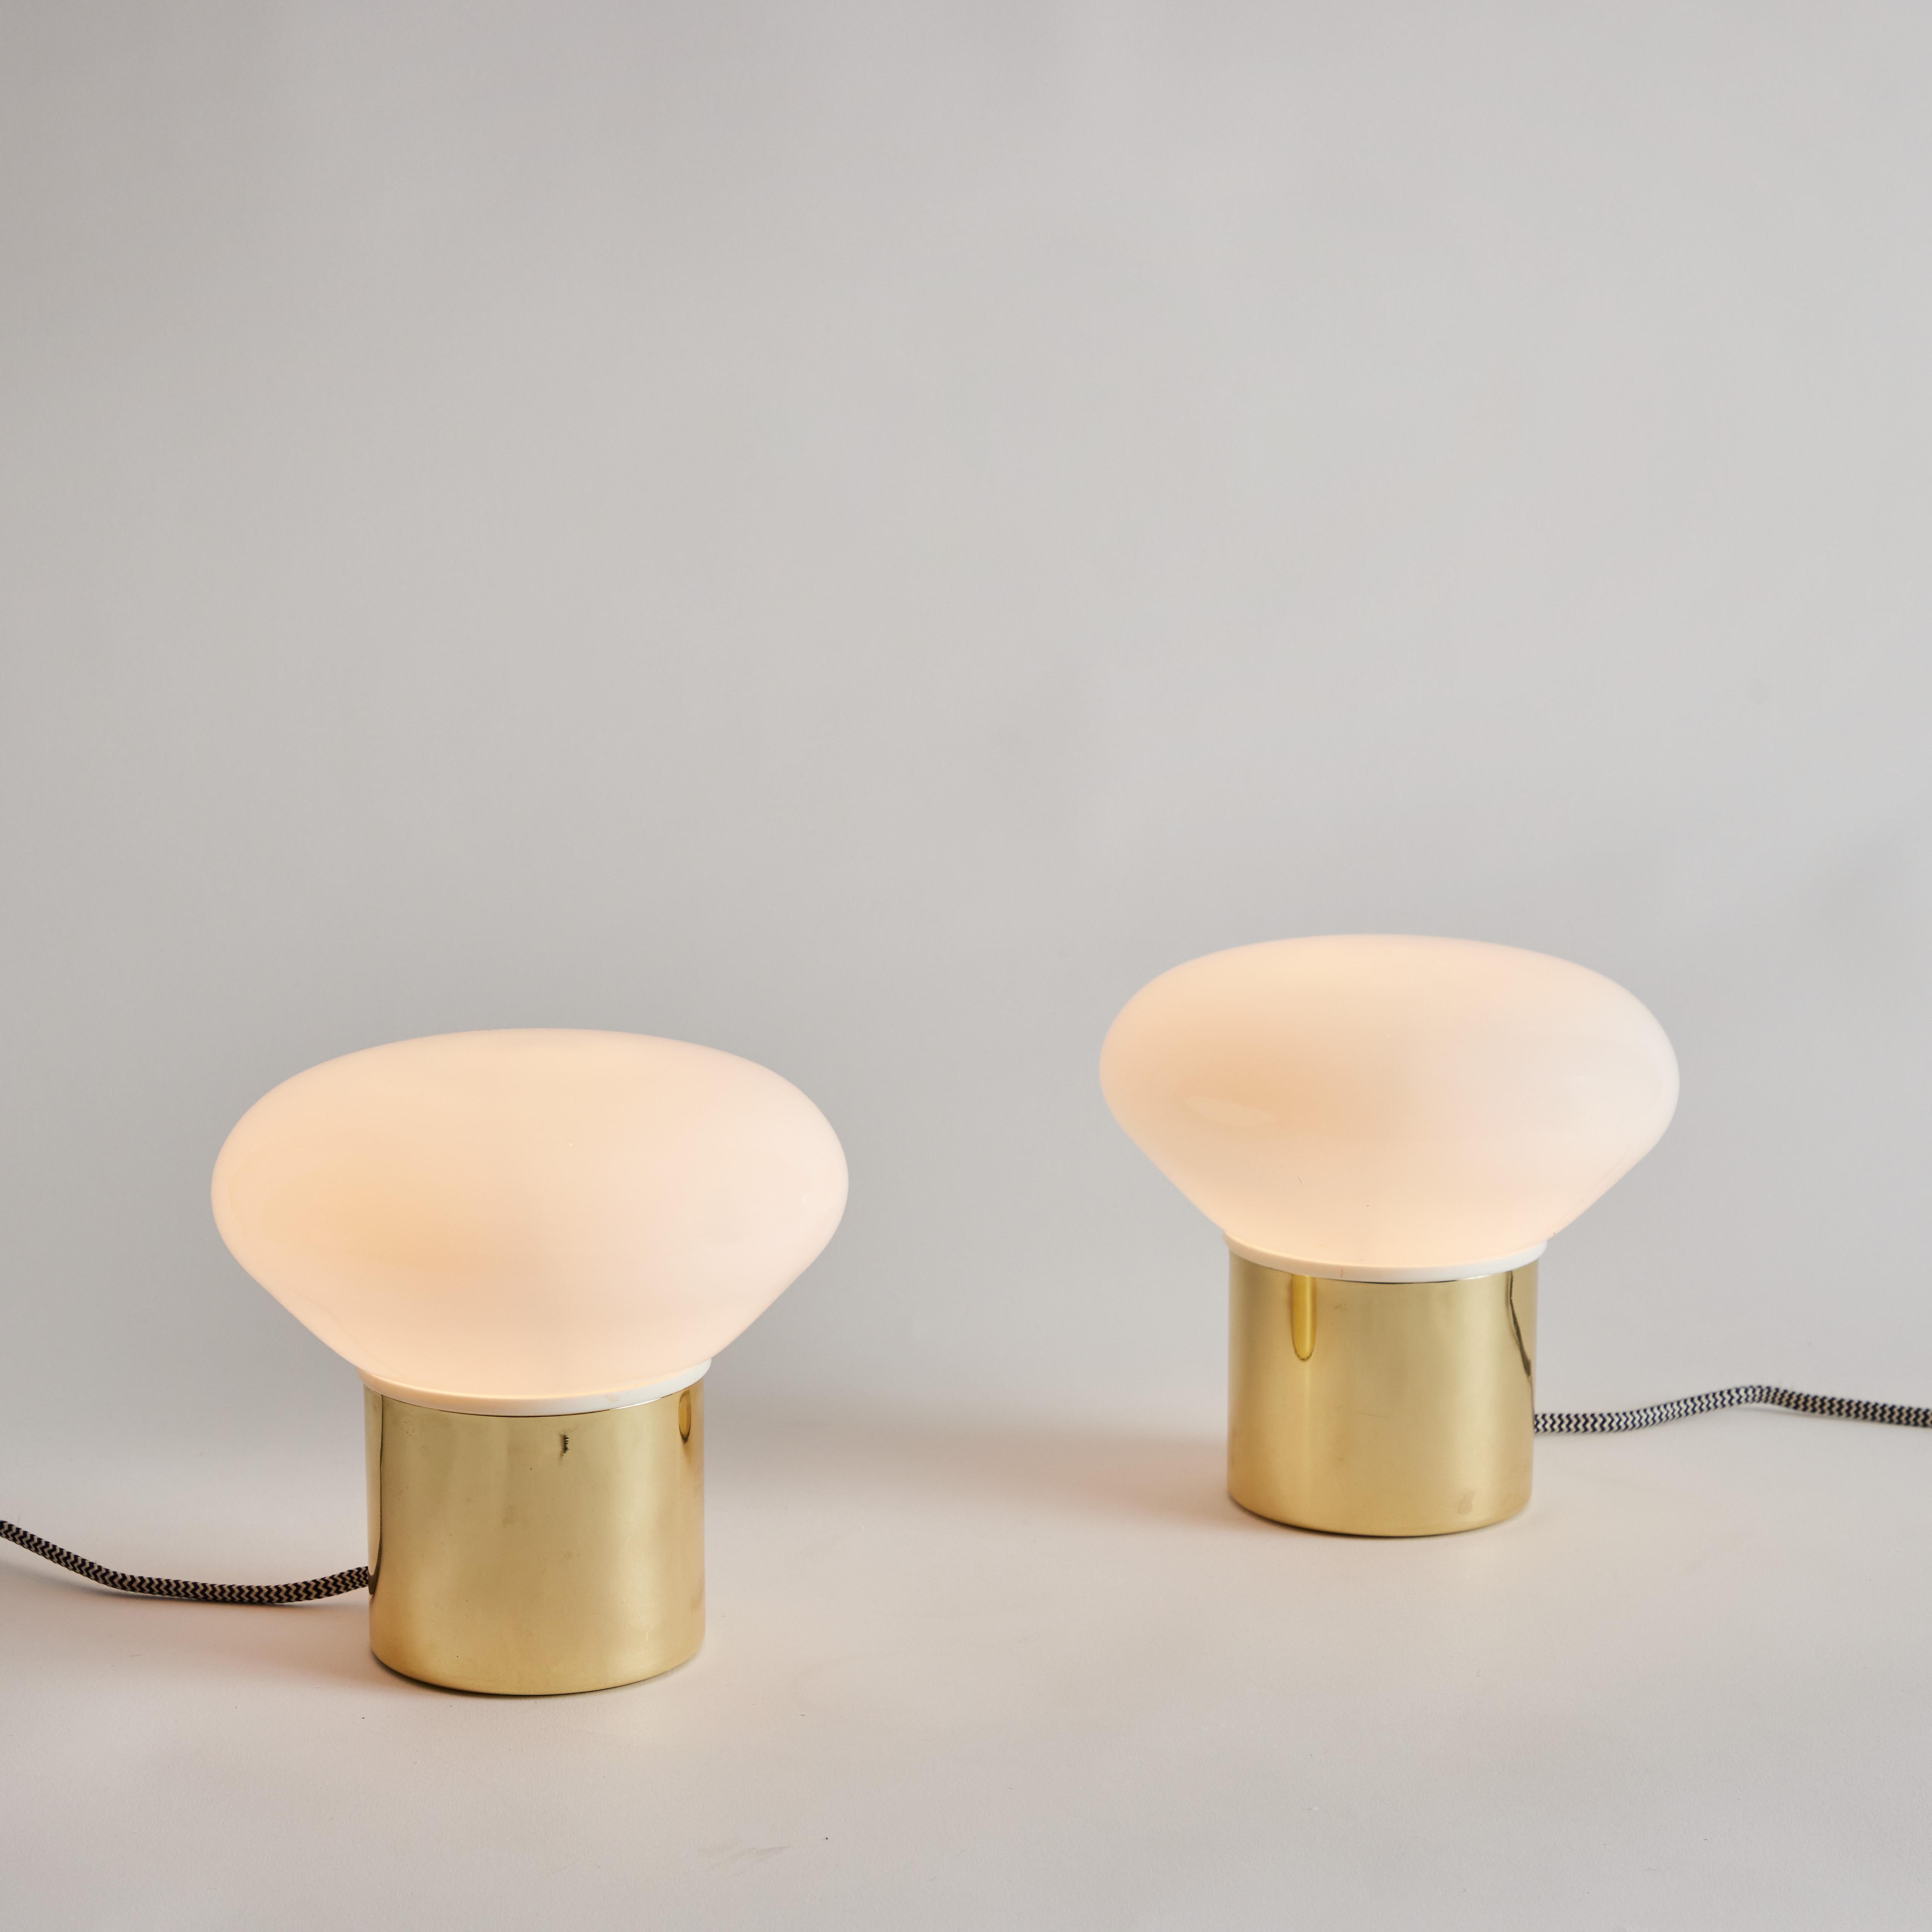 Mid-Century Modern Pair of 1970s Italian Glass & Metal 'Porcini' Table Lamps Attributed to Tronconi